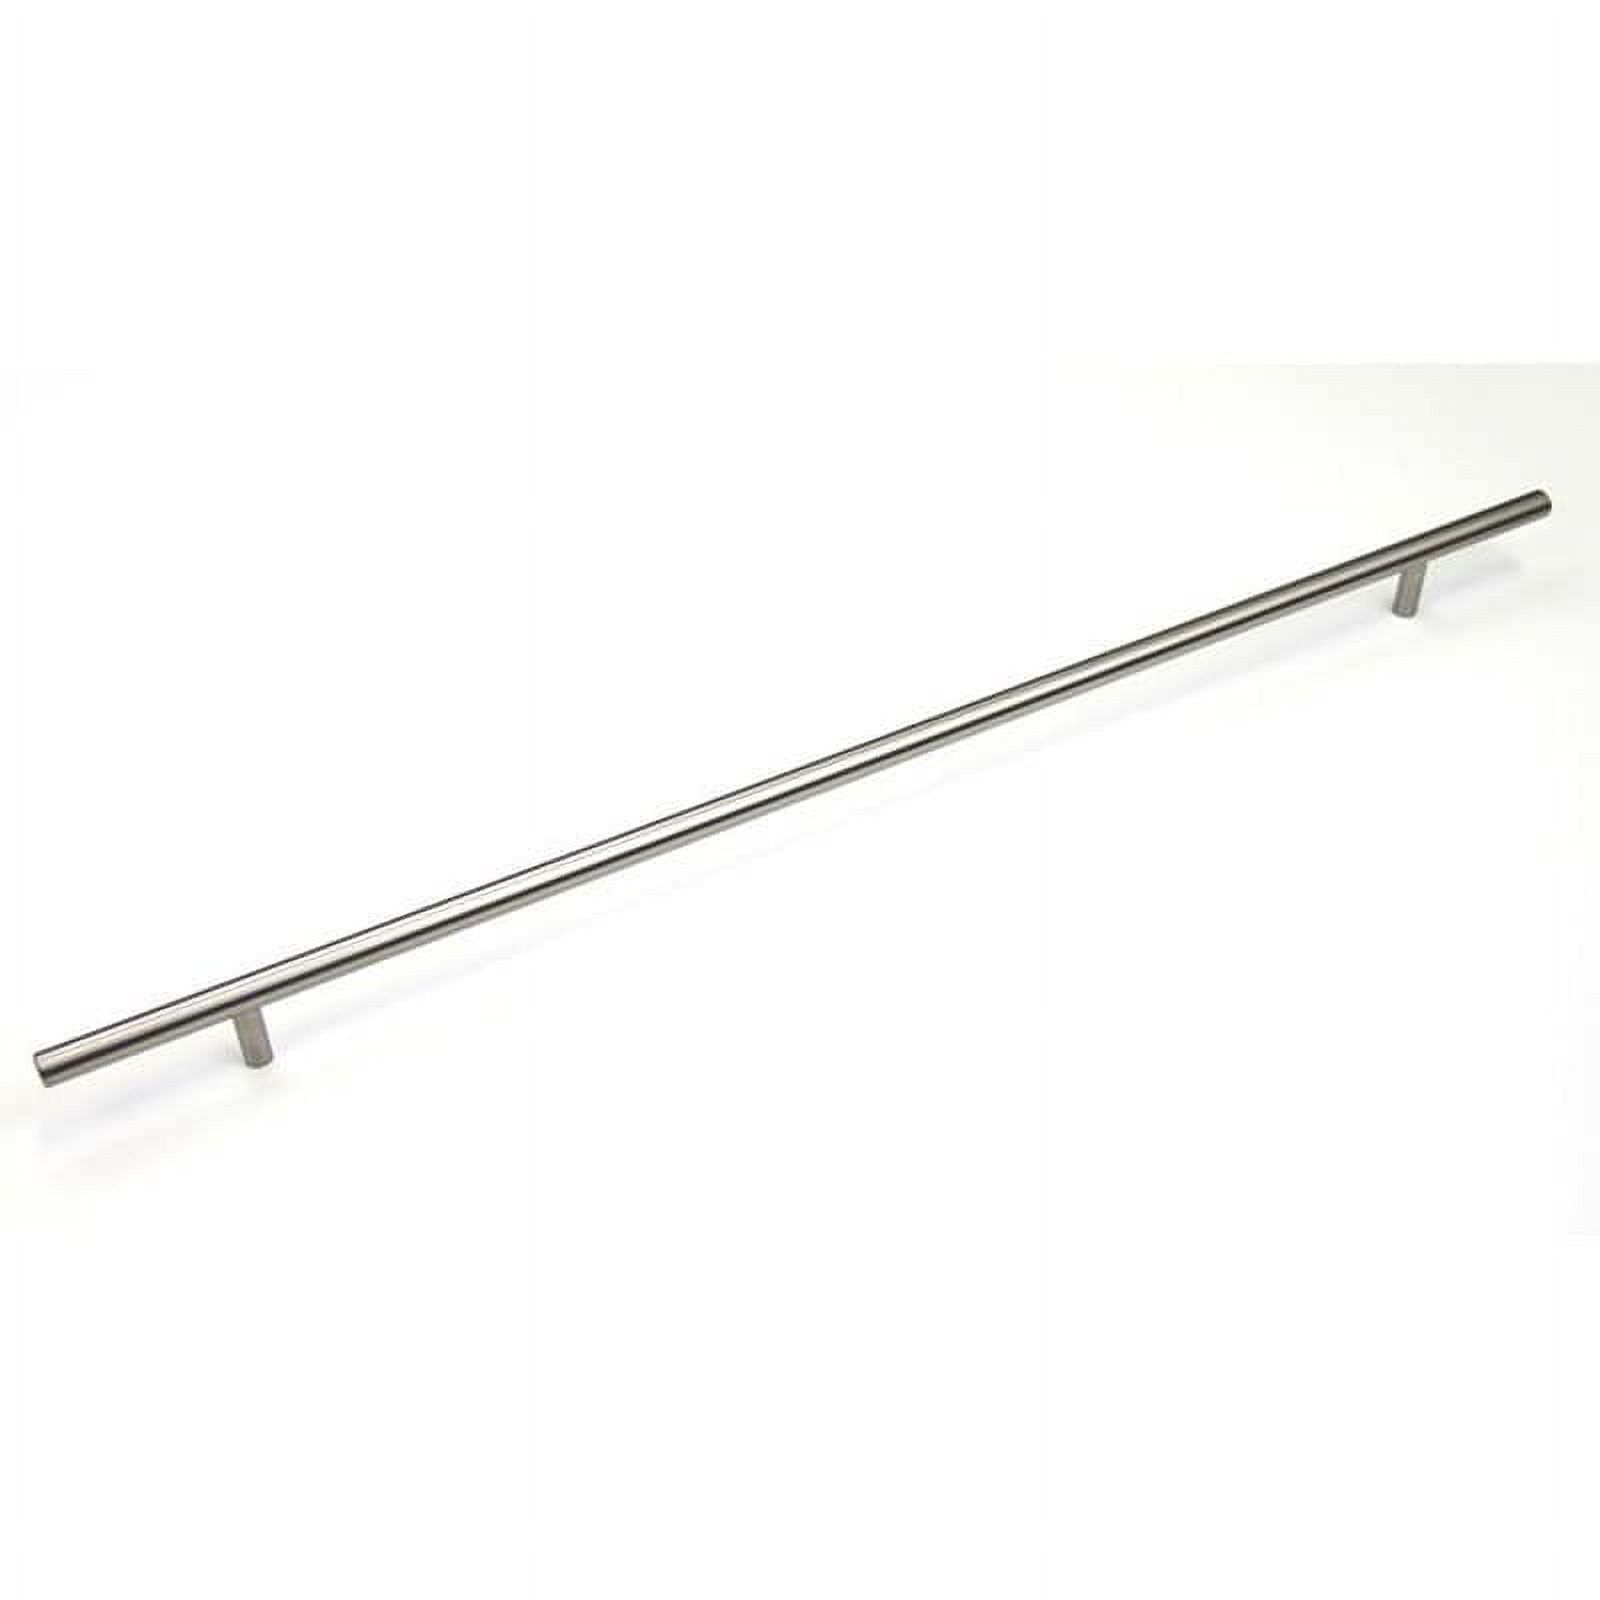 22" Solid Stainless Steel Cabinet Bar Pull Handles 22-inch Stainless Steel Cabinet Bar Pull Handles (Case of 10) - image 1 of 3